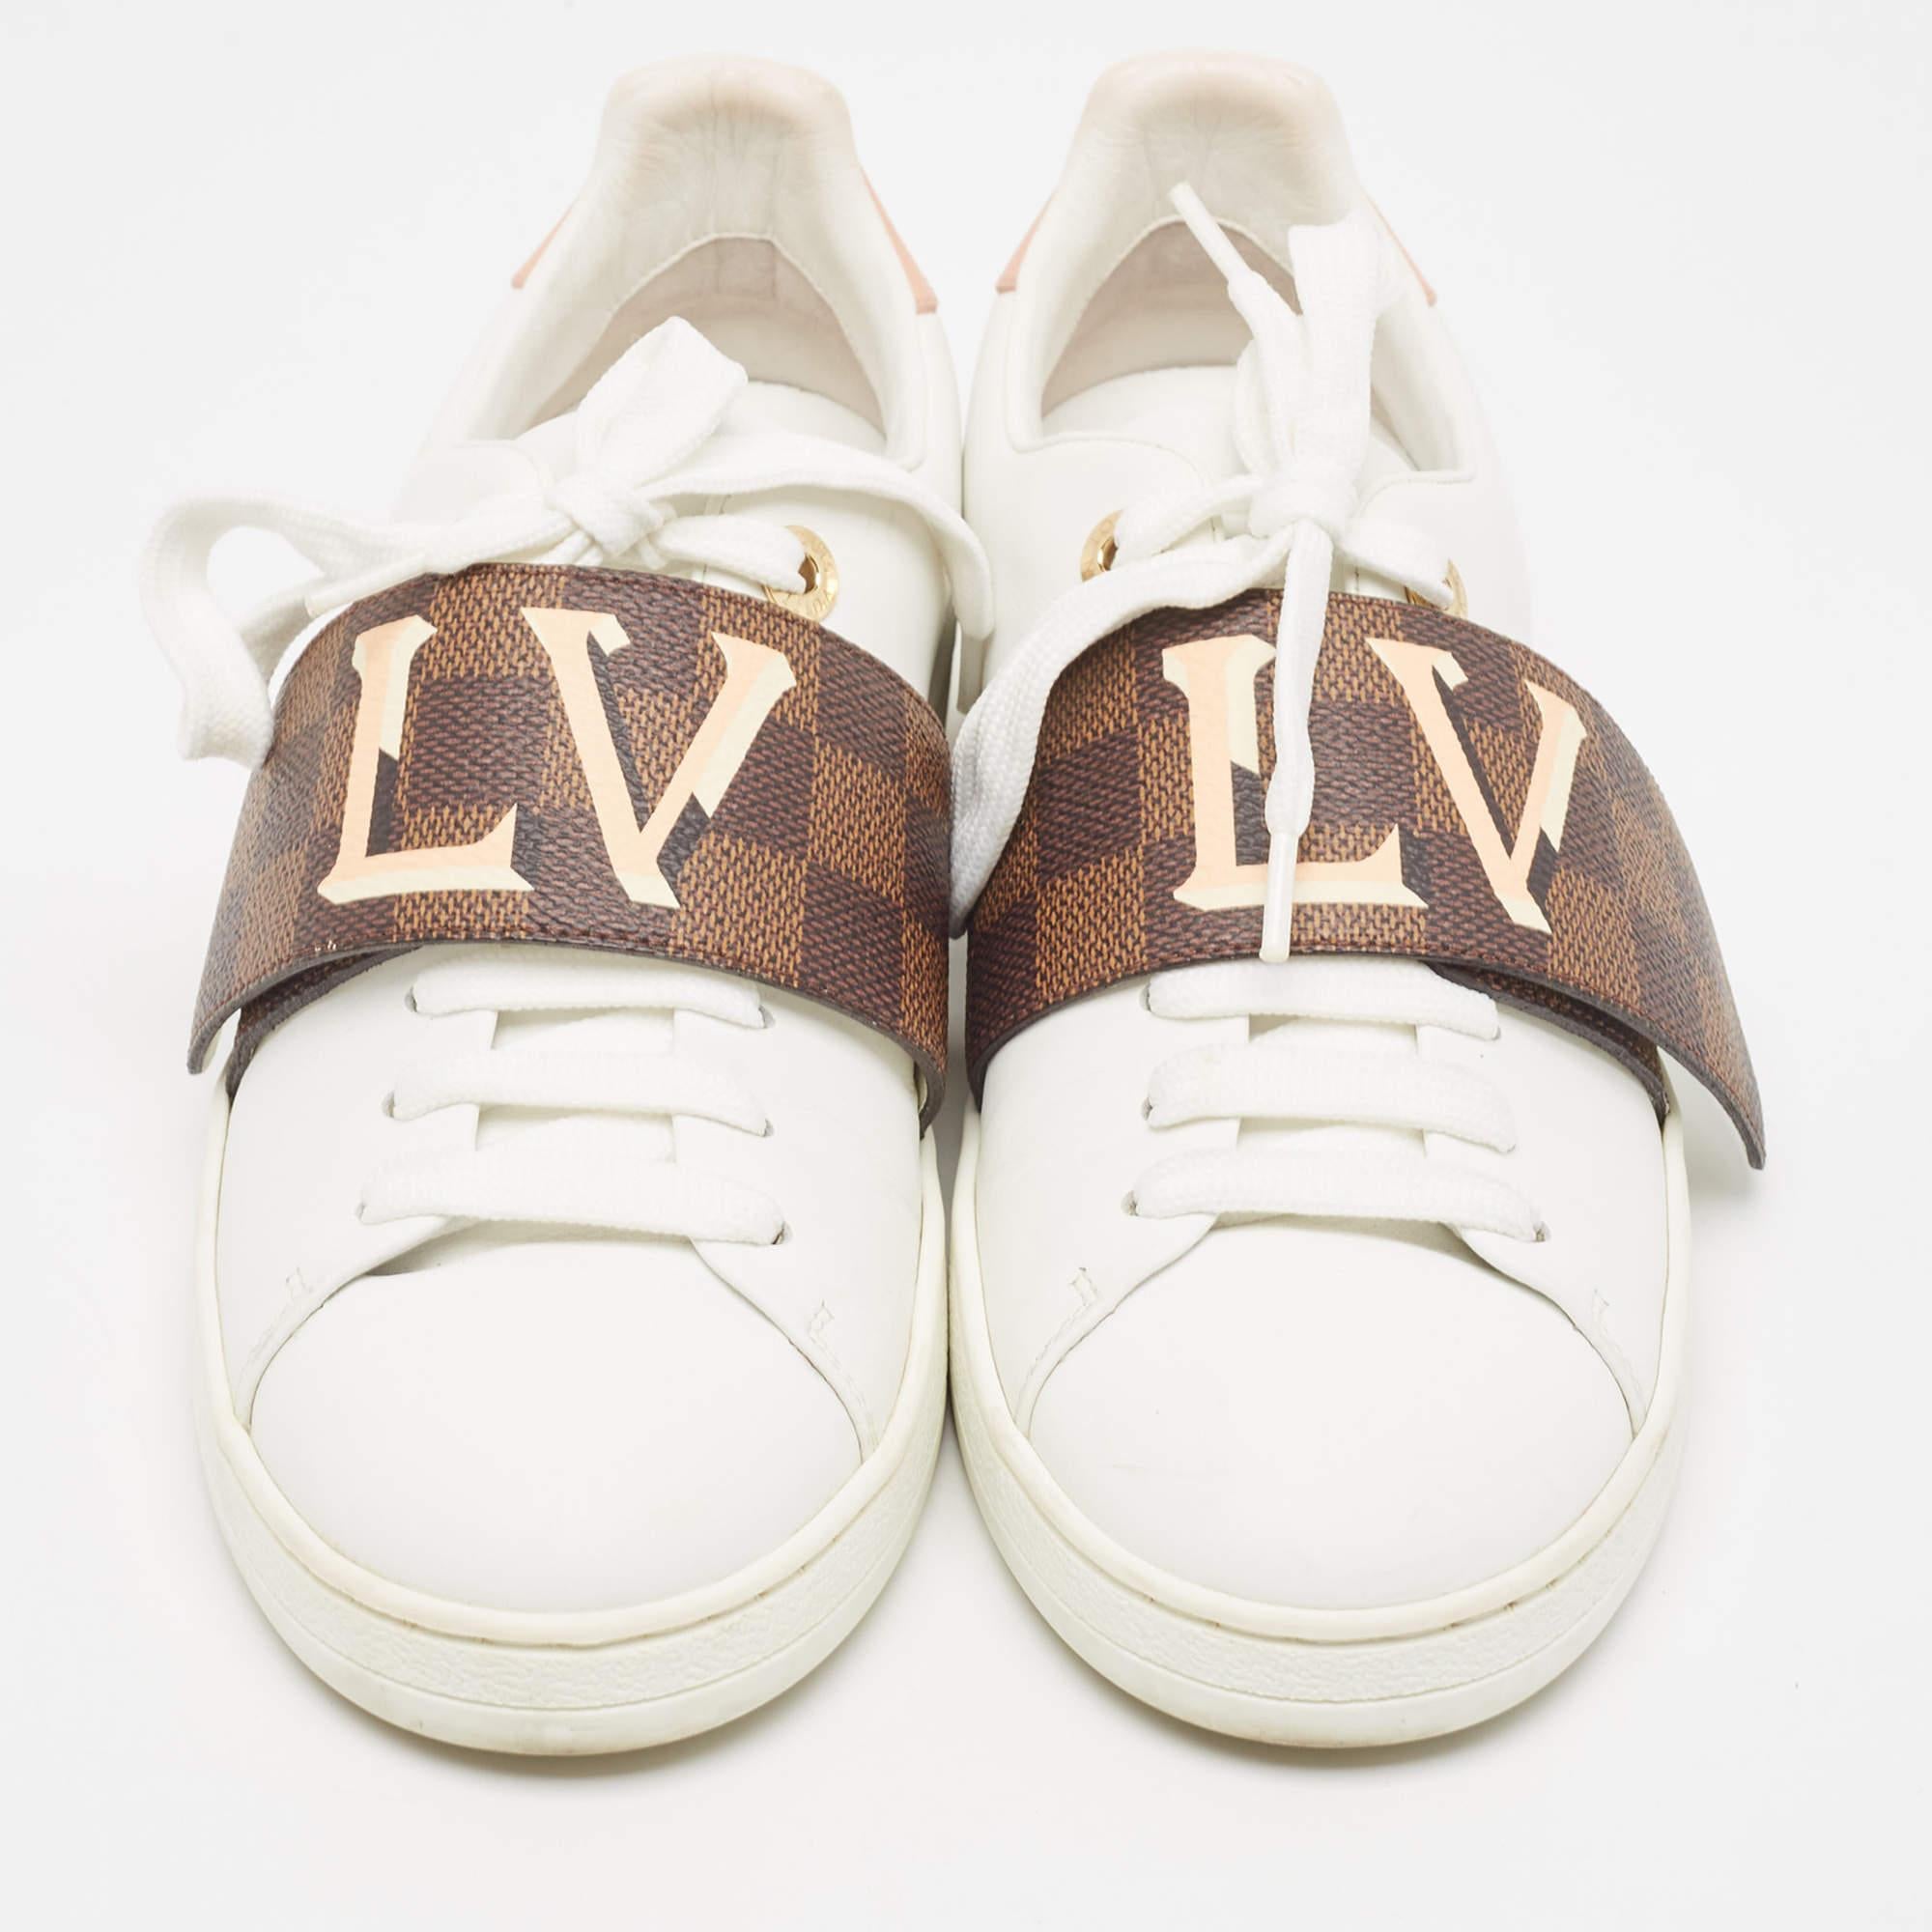 A great way to elevate your casual look, these white sneakers from Louis Vuitton feature a contrasting velcro strap over the lace-up vamps. The brand name vamps adds a luxe touch to the design.

